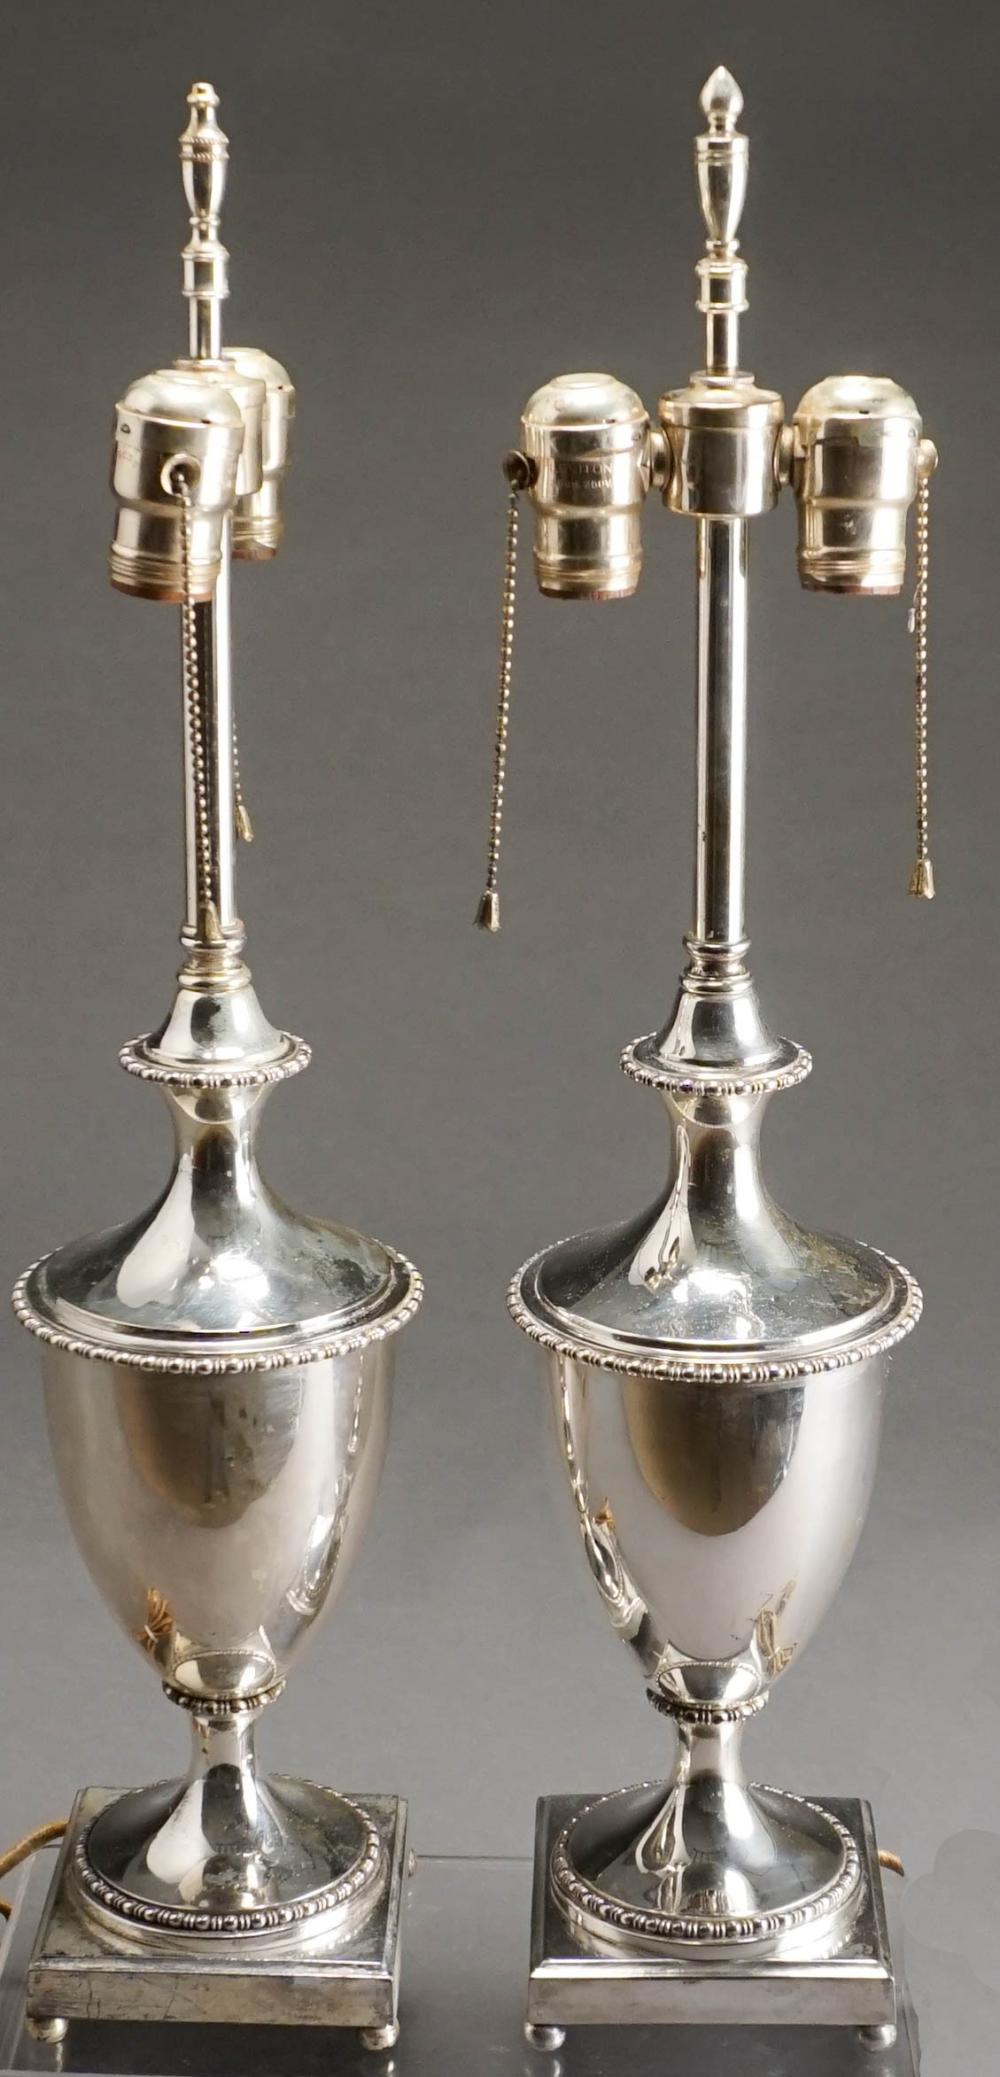 PAIR OF SILVER PLATE URNS MOUNTED